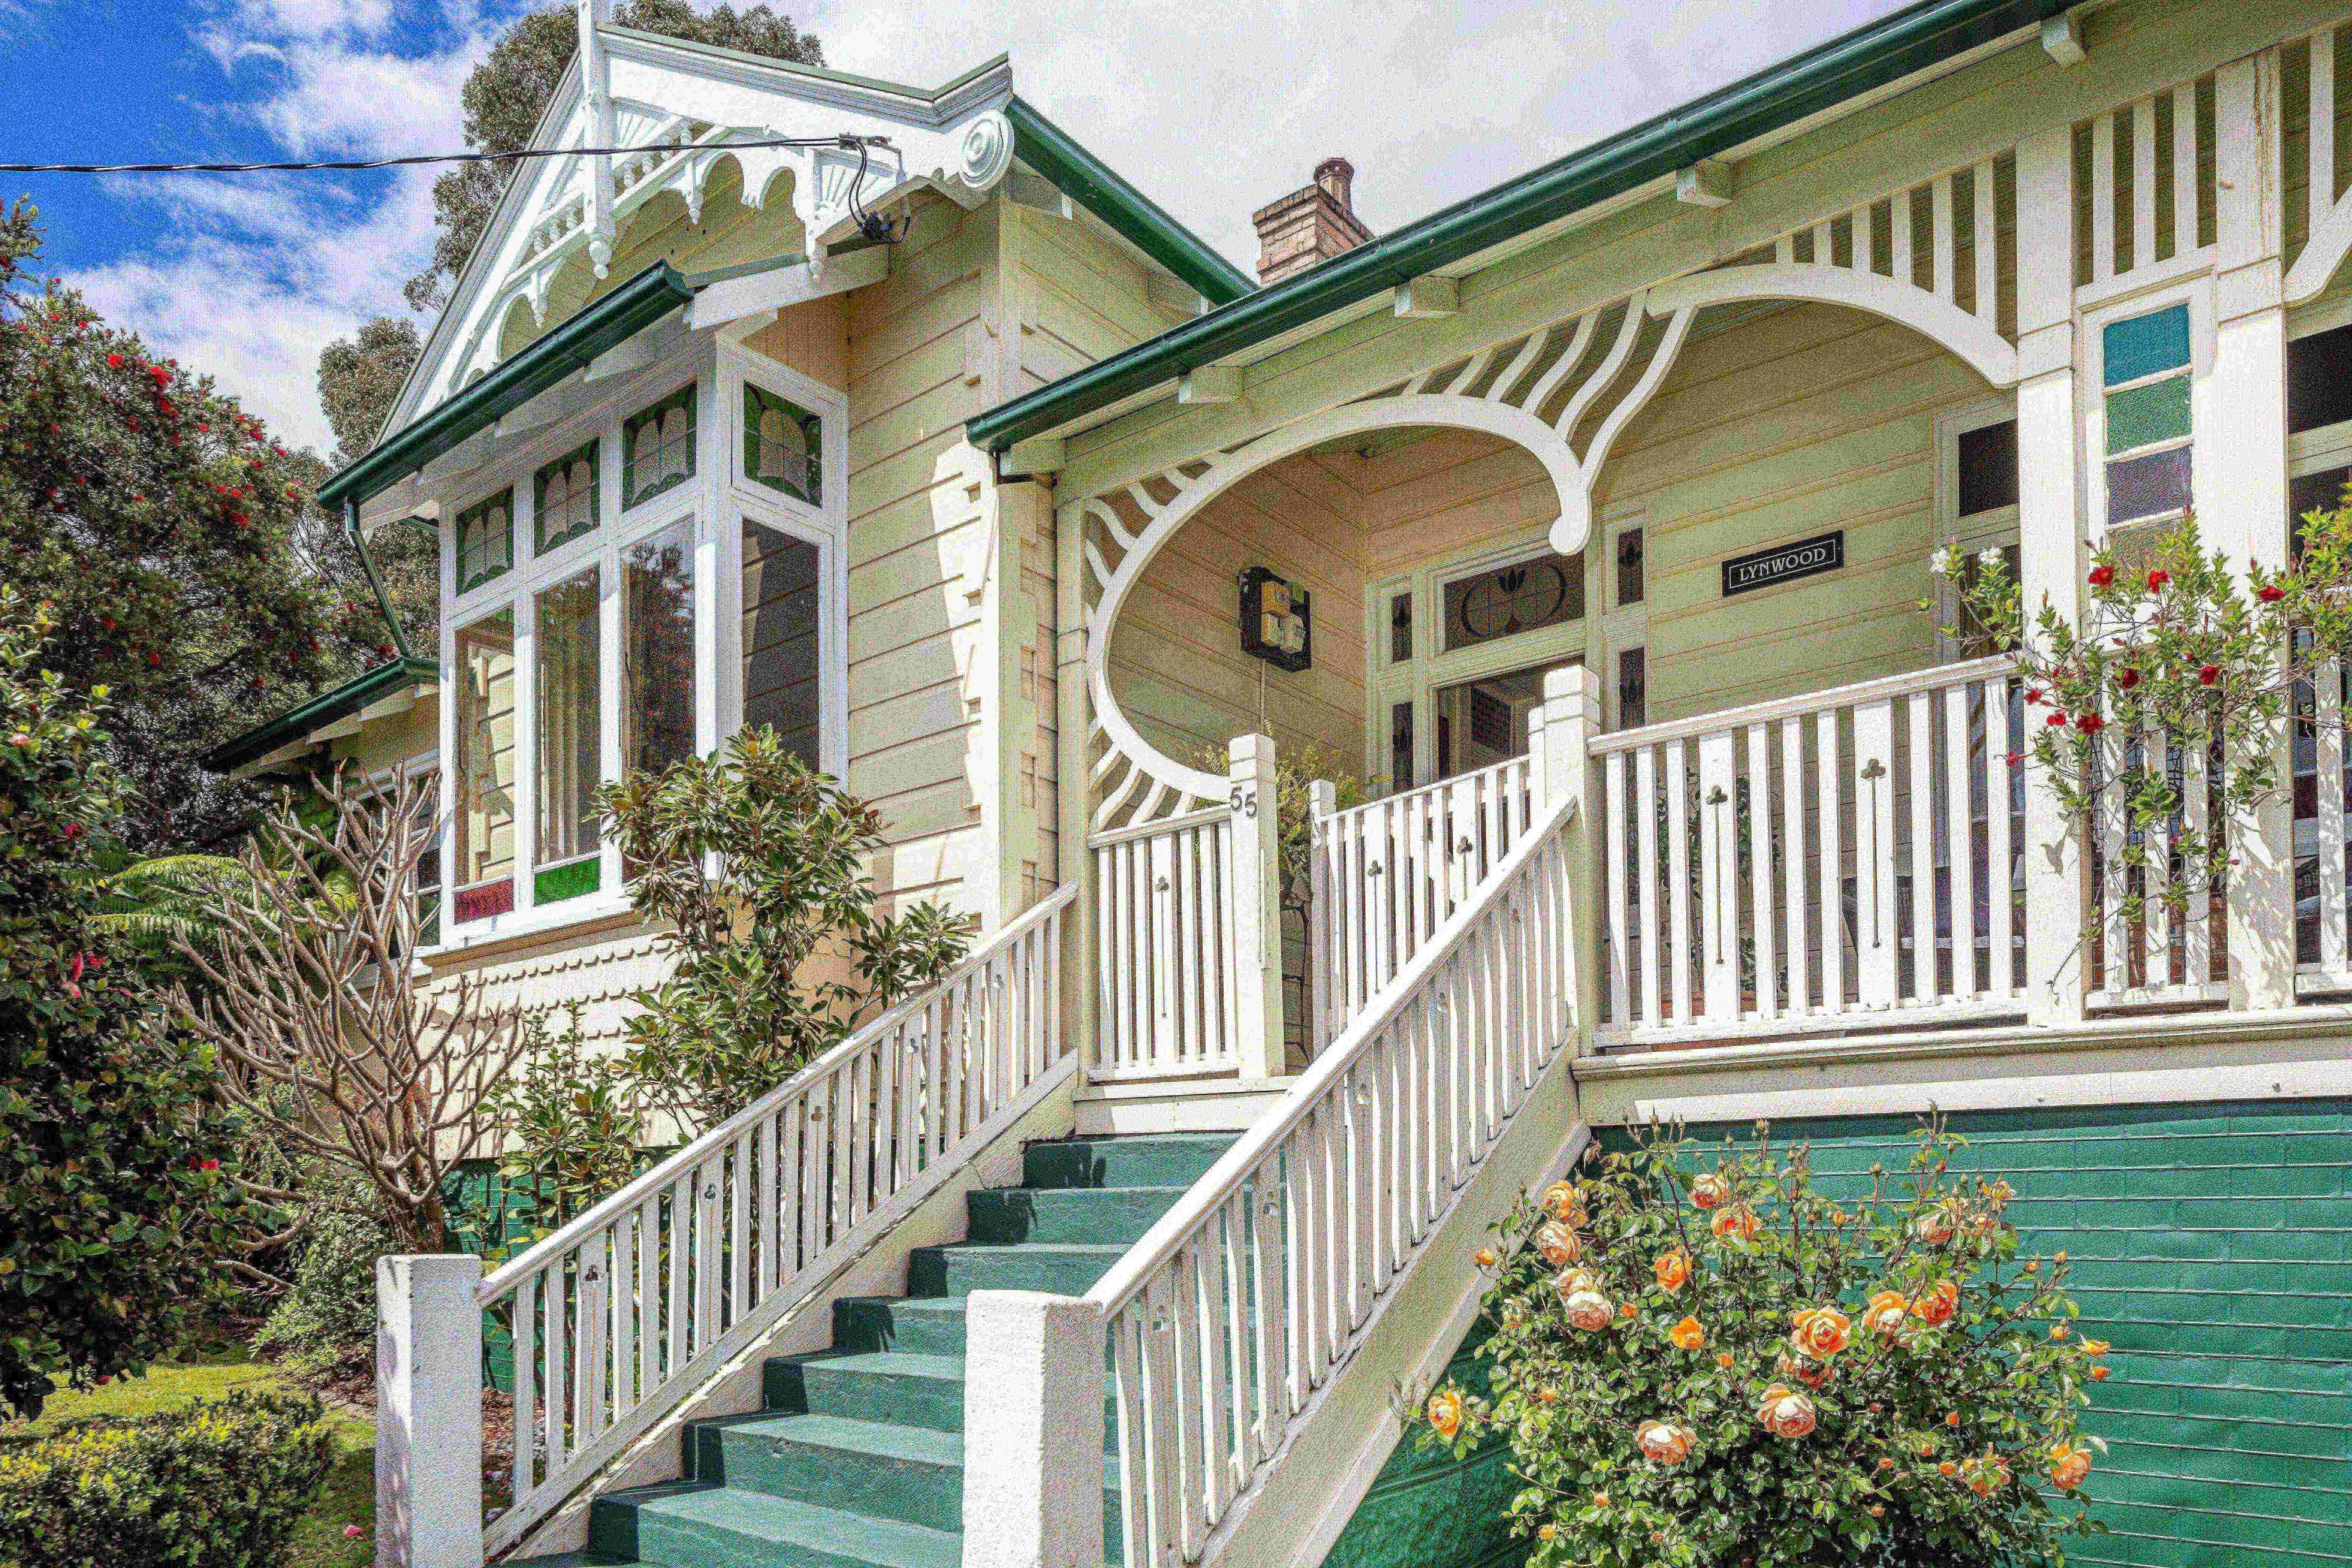 Step back in time to the grand art-nouveau era in this heritage coastal homestead